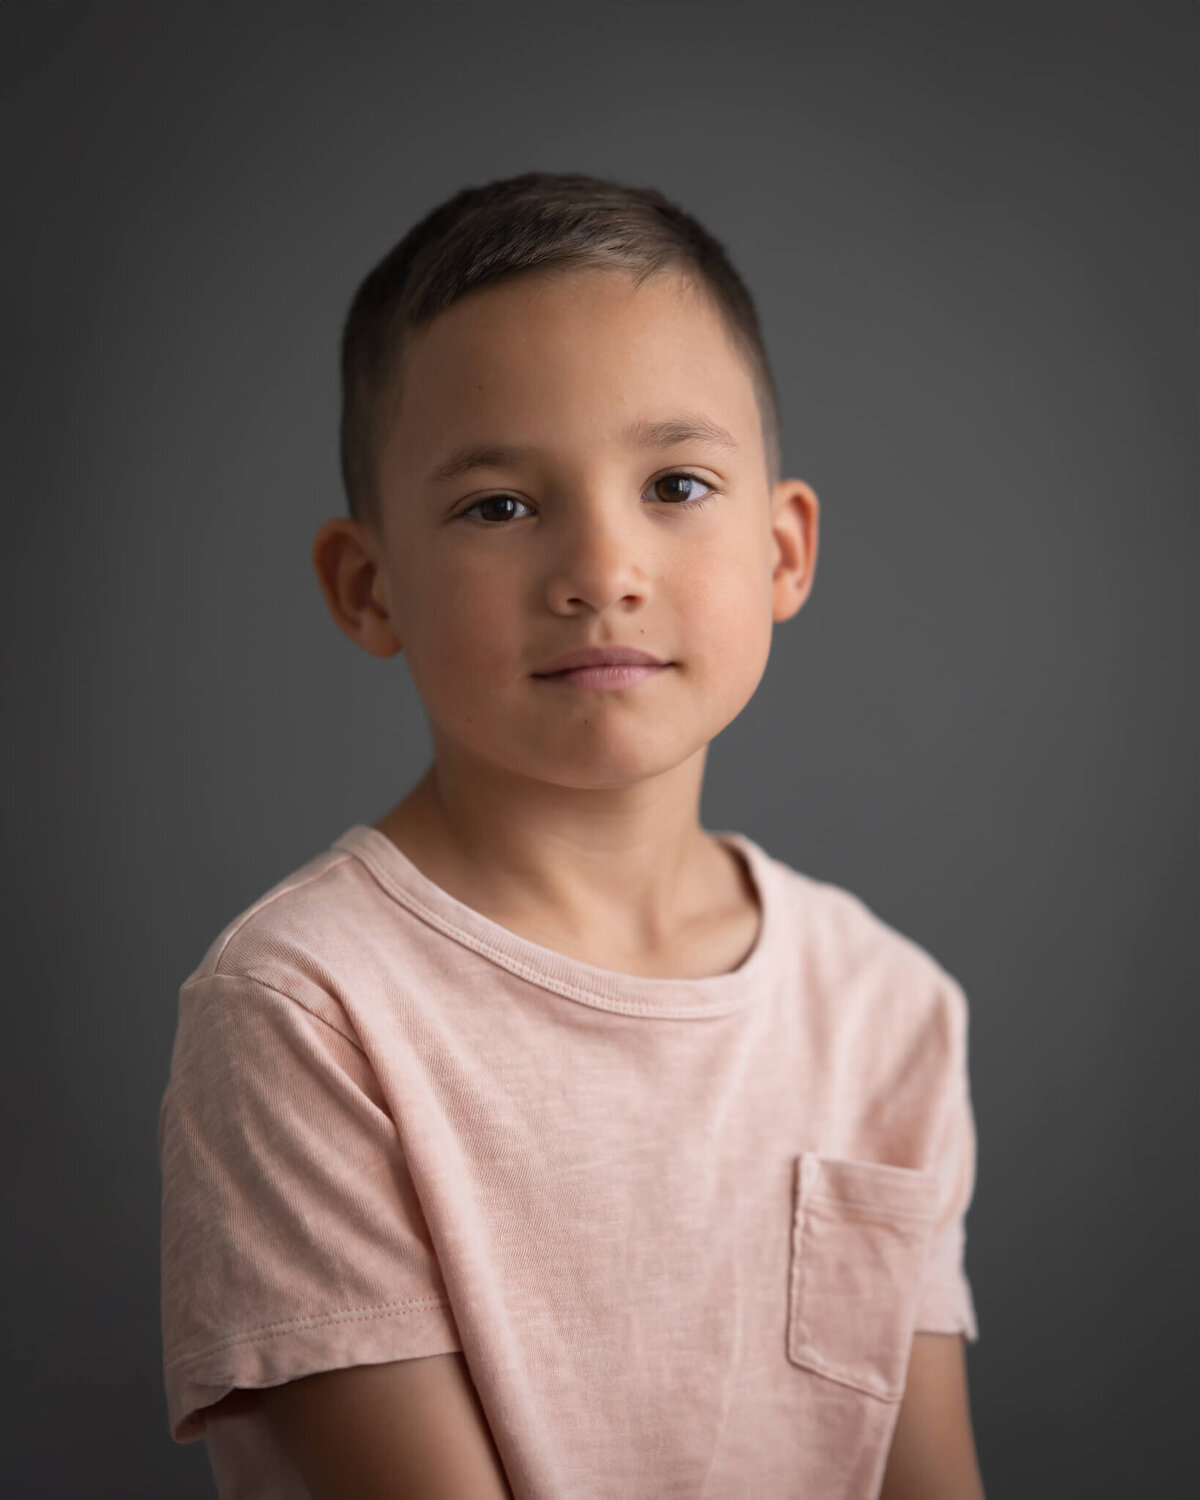 studio portrait of boy in light pink shirt with grey backdrop and a serious face